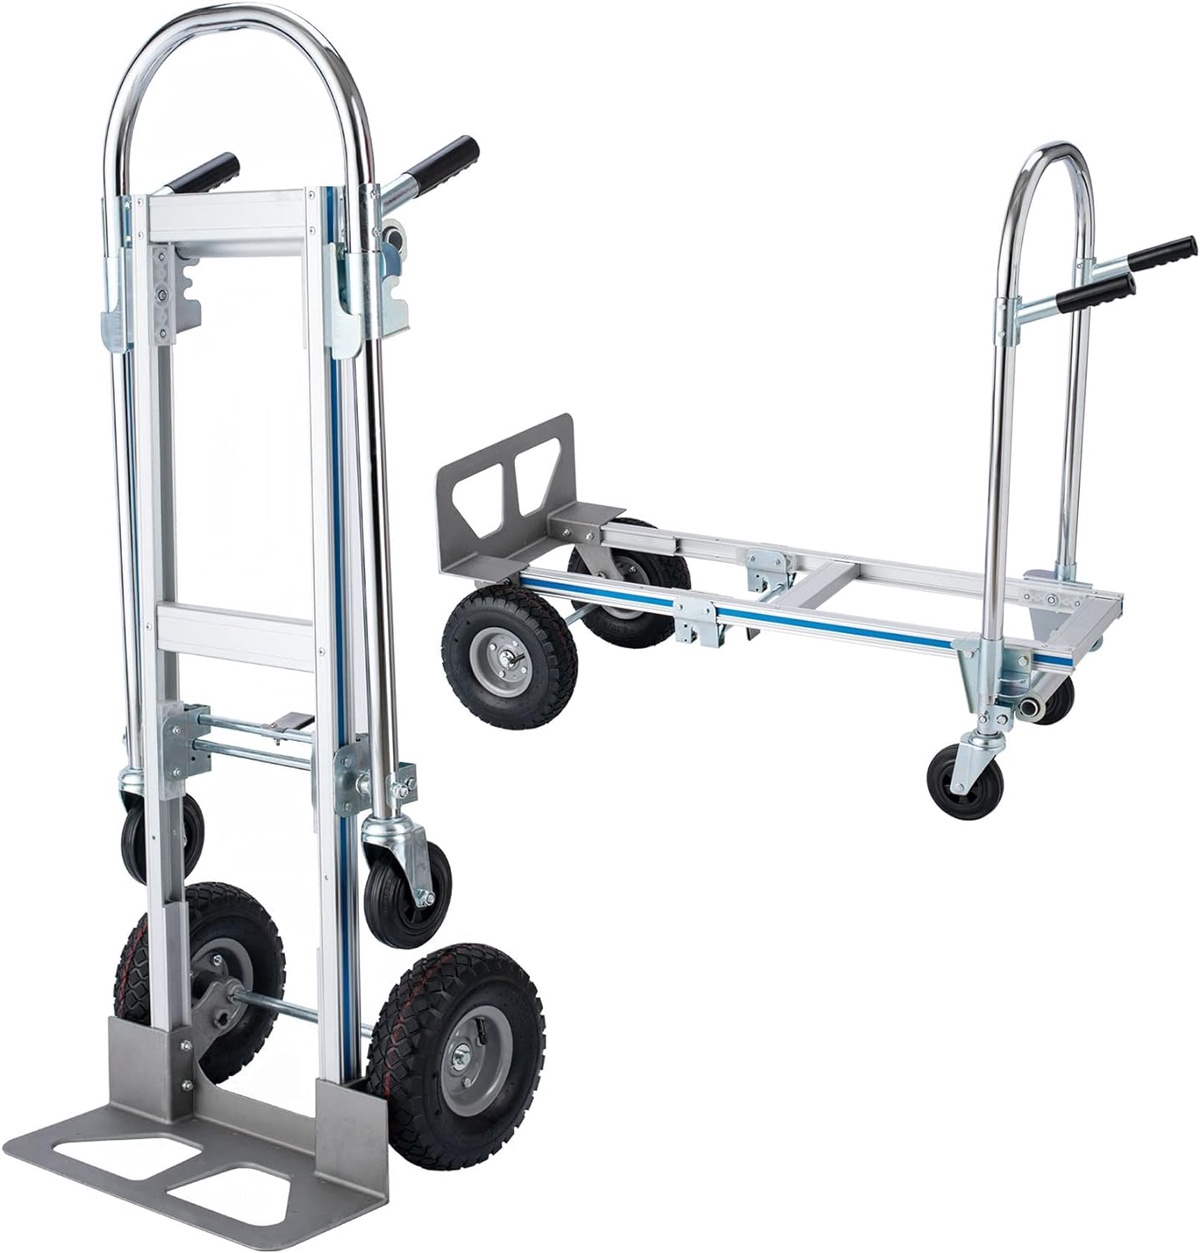 How to Properly Maintain Your Foldable Hand Truck for Longevity